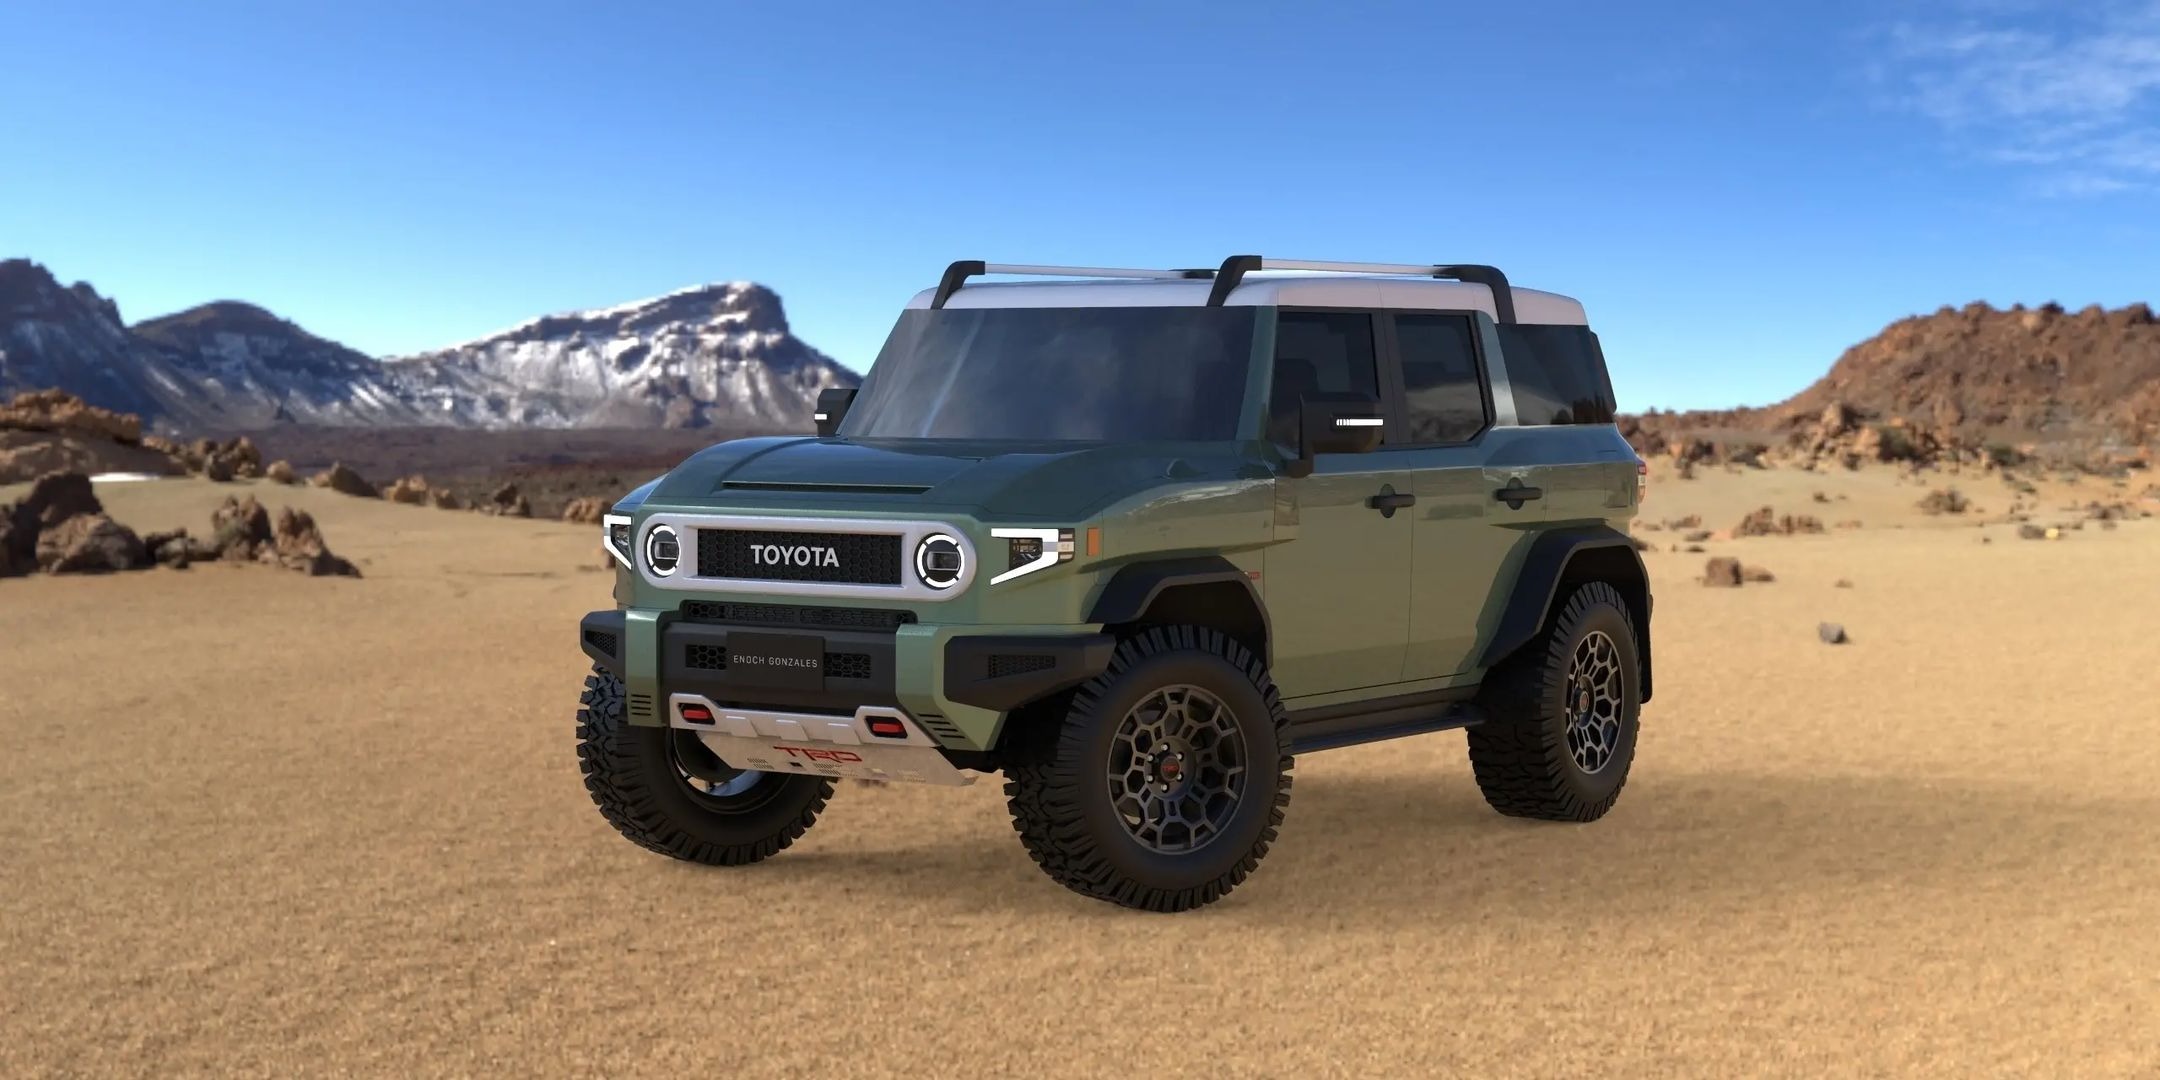 Our Stunning 2024 Toyota FJ Cruiser Render Brings The Iconic Off